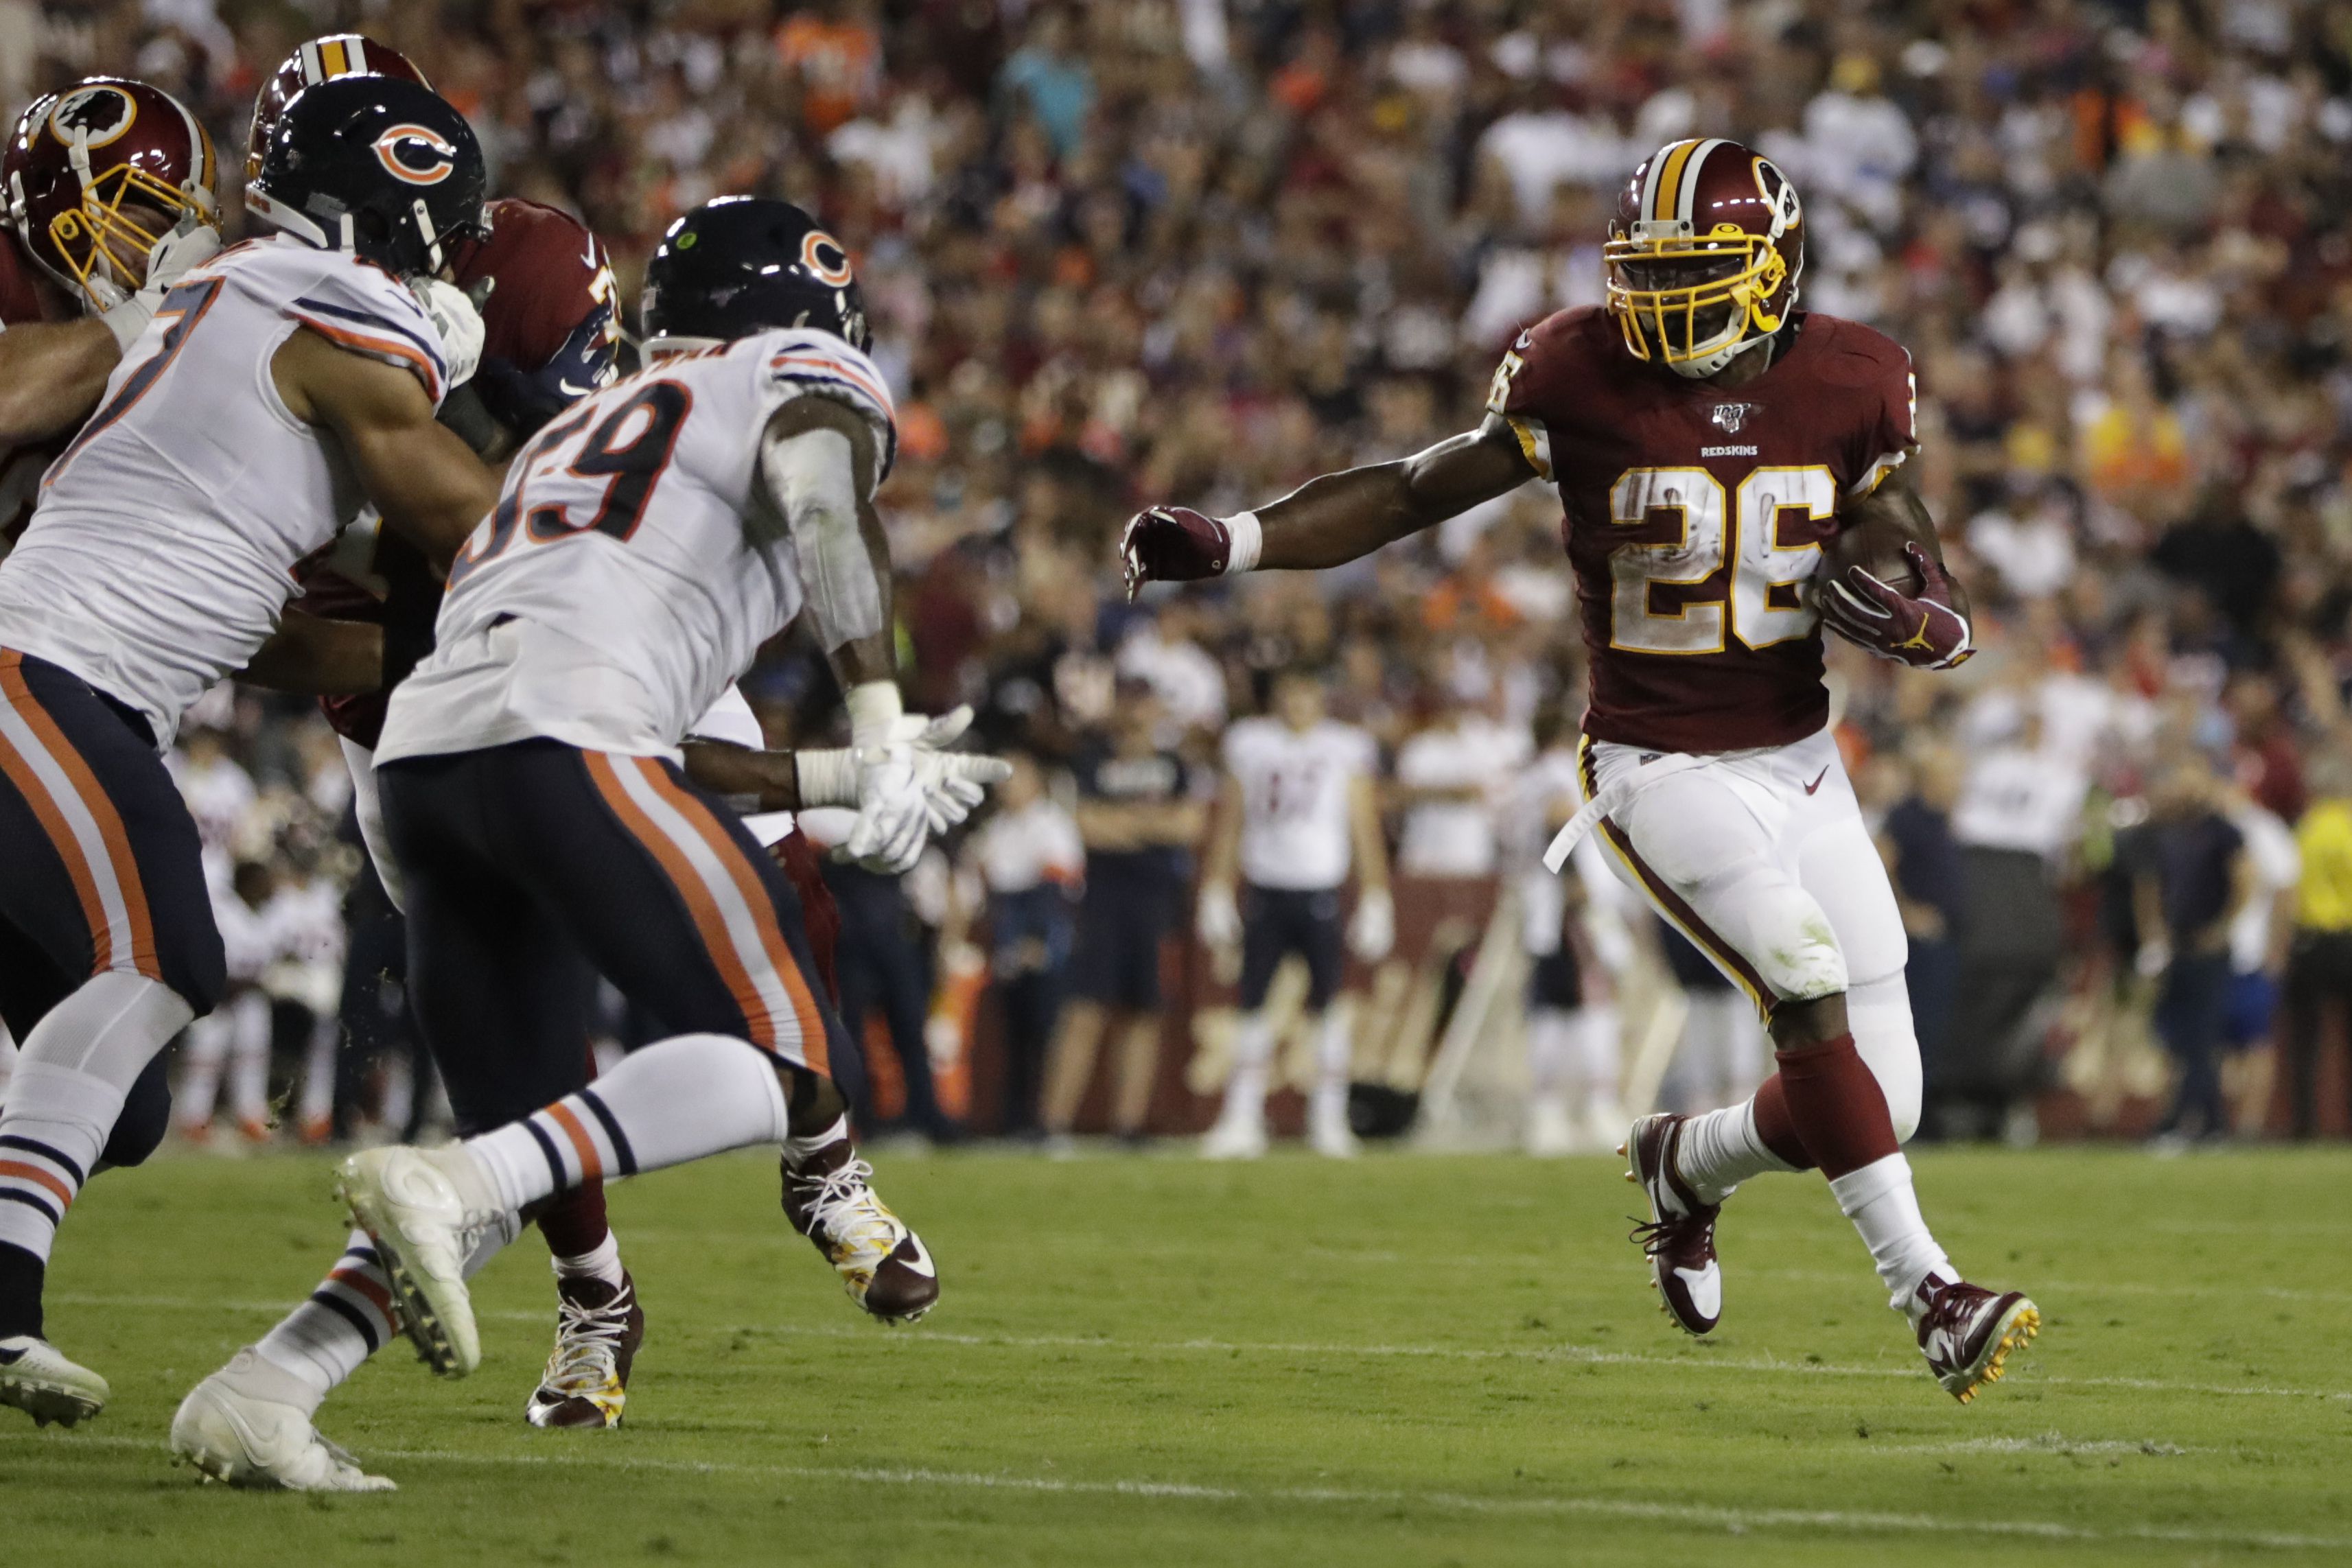 NFL rumors: Adrian Peterson uses 1 word to describe Redskins